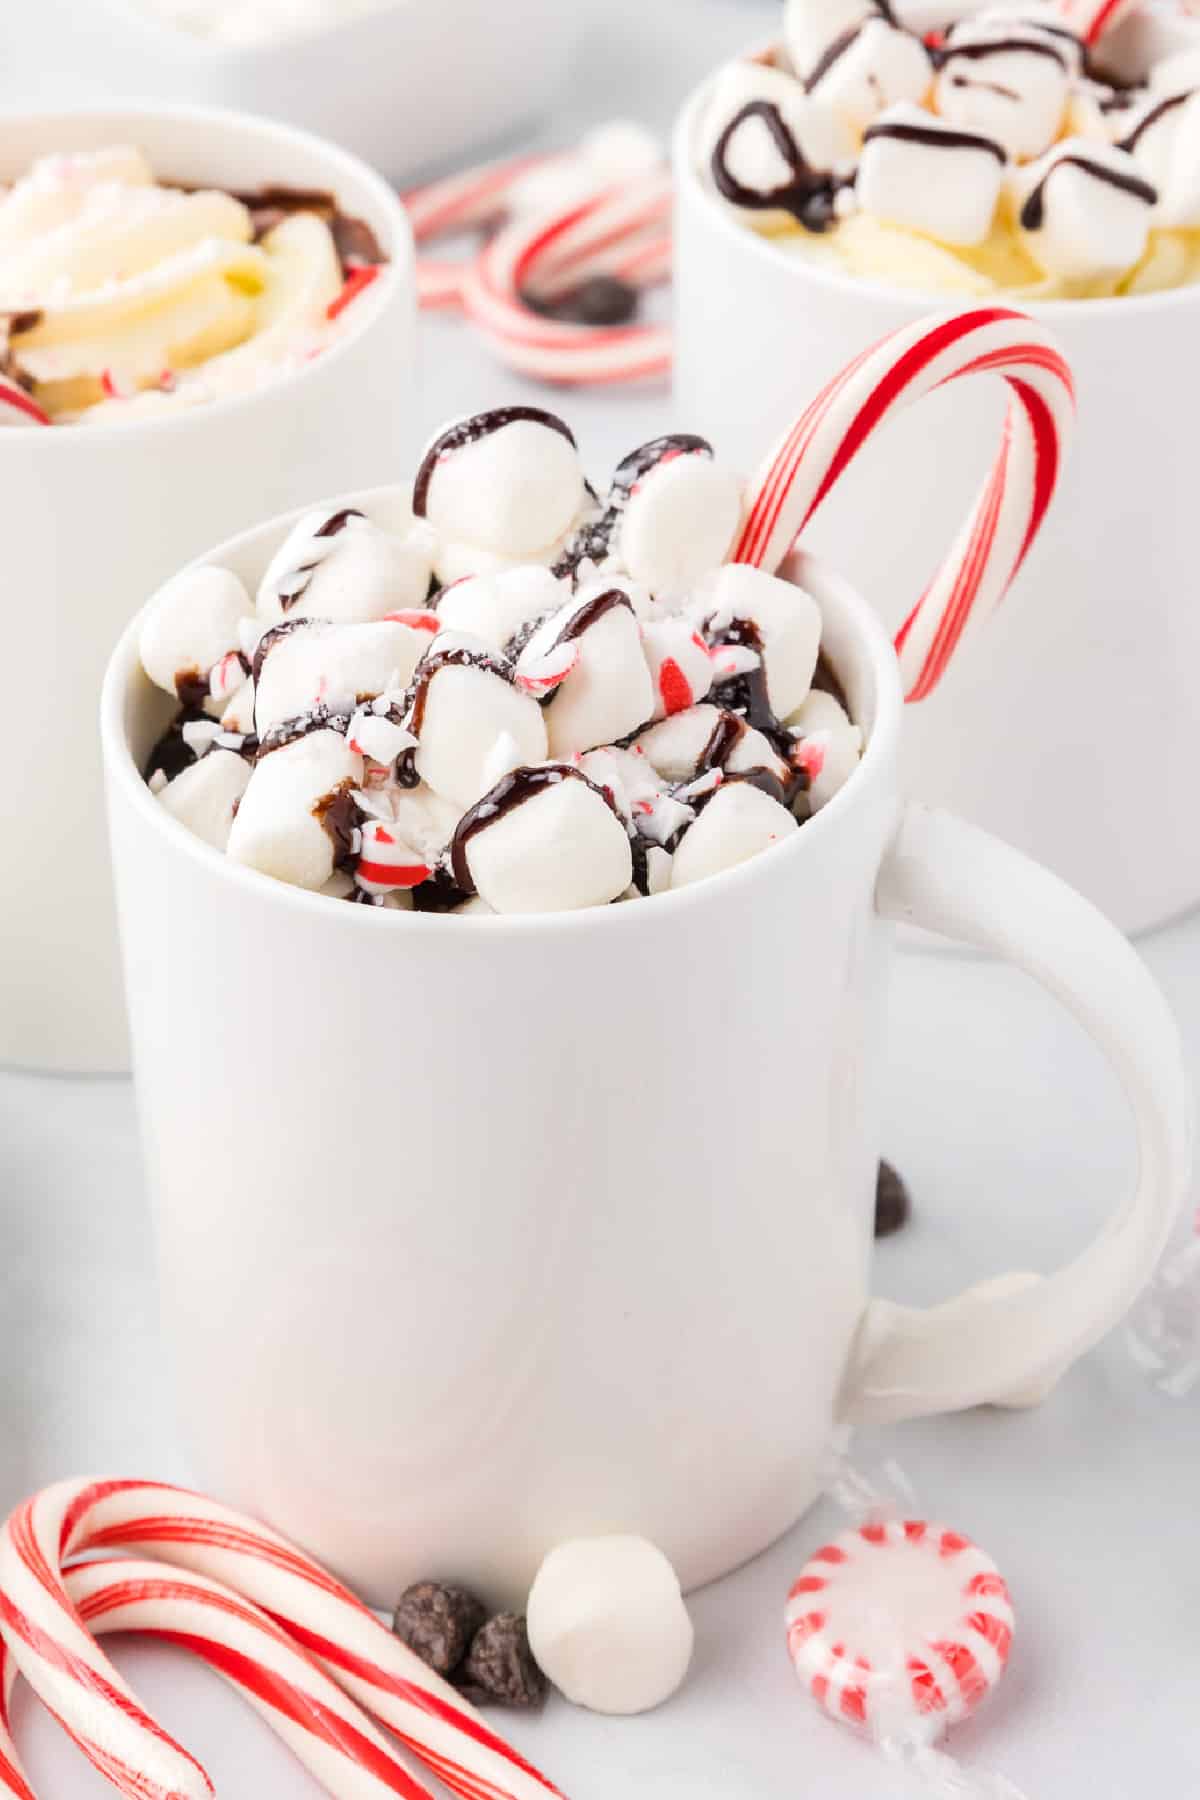 Hot chocolate with marshmallows and candy canes.